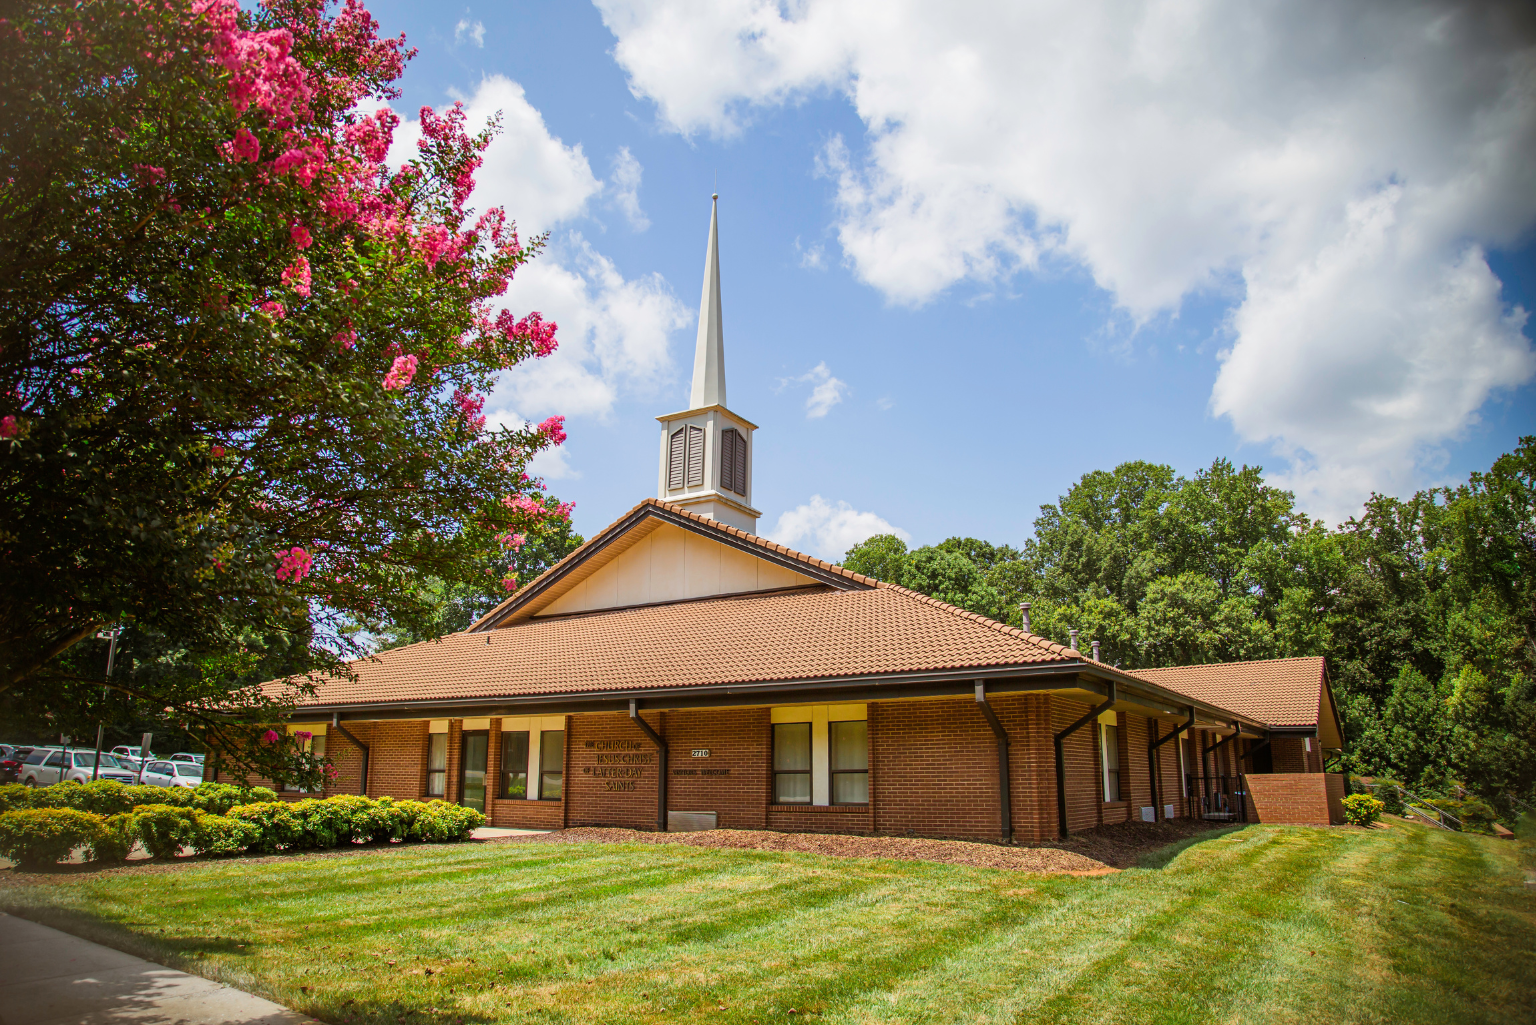 The Gastonia meetinghouse for The Church of Jesus Christ of Latter-day Saints